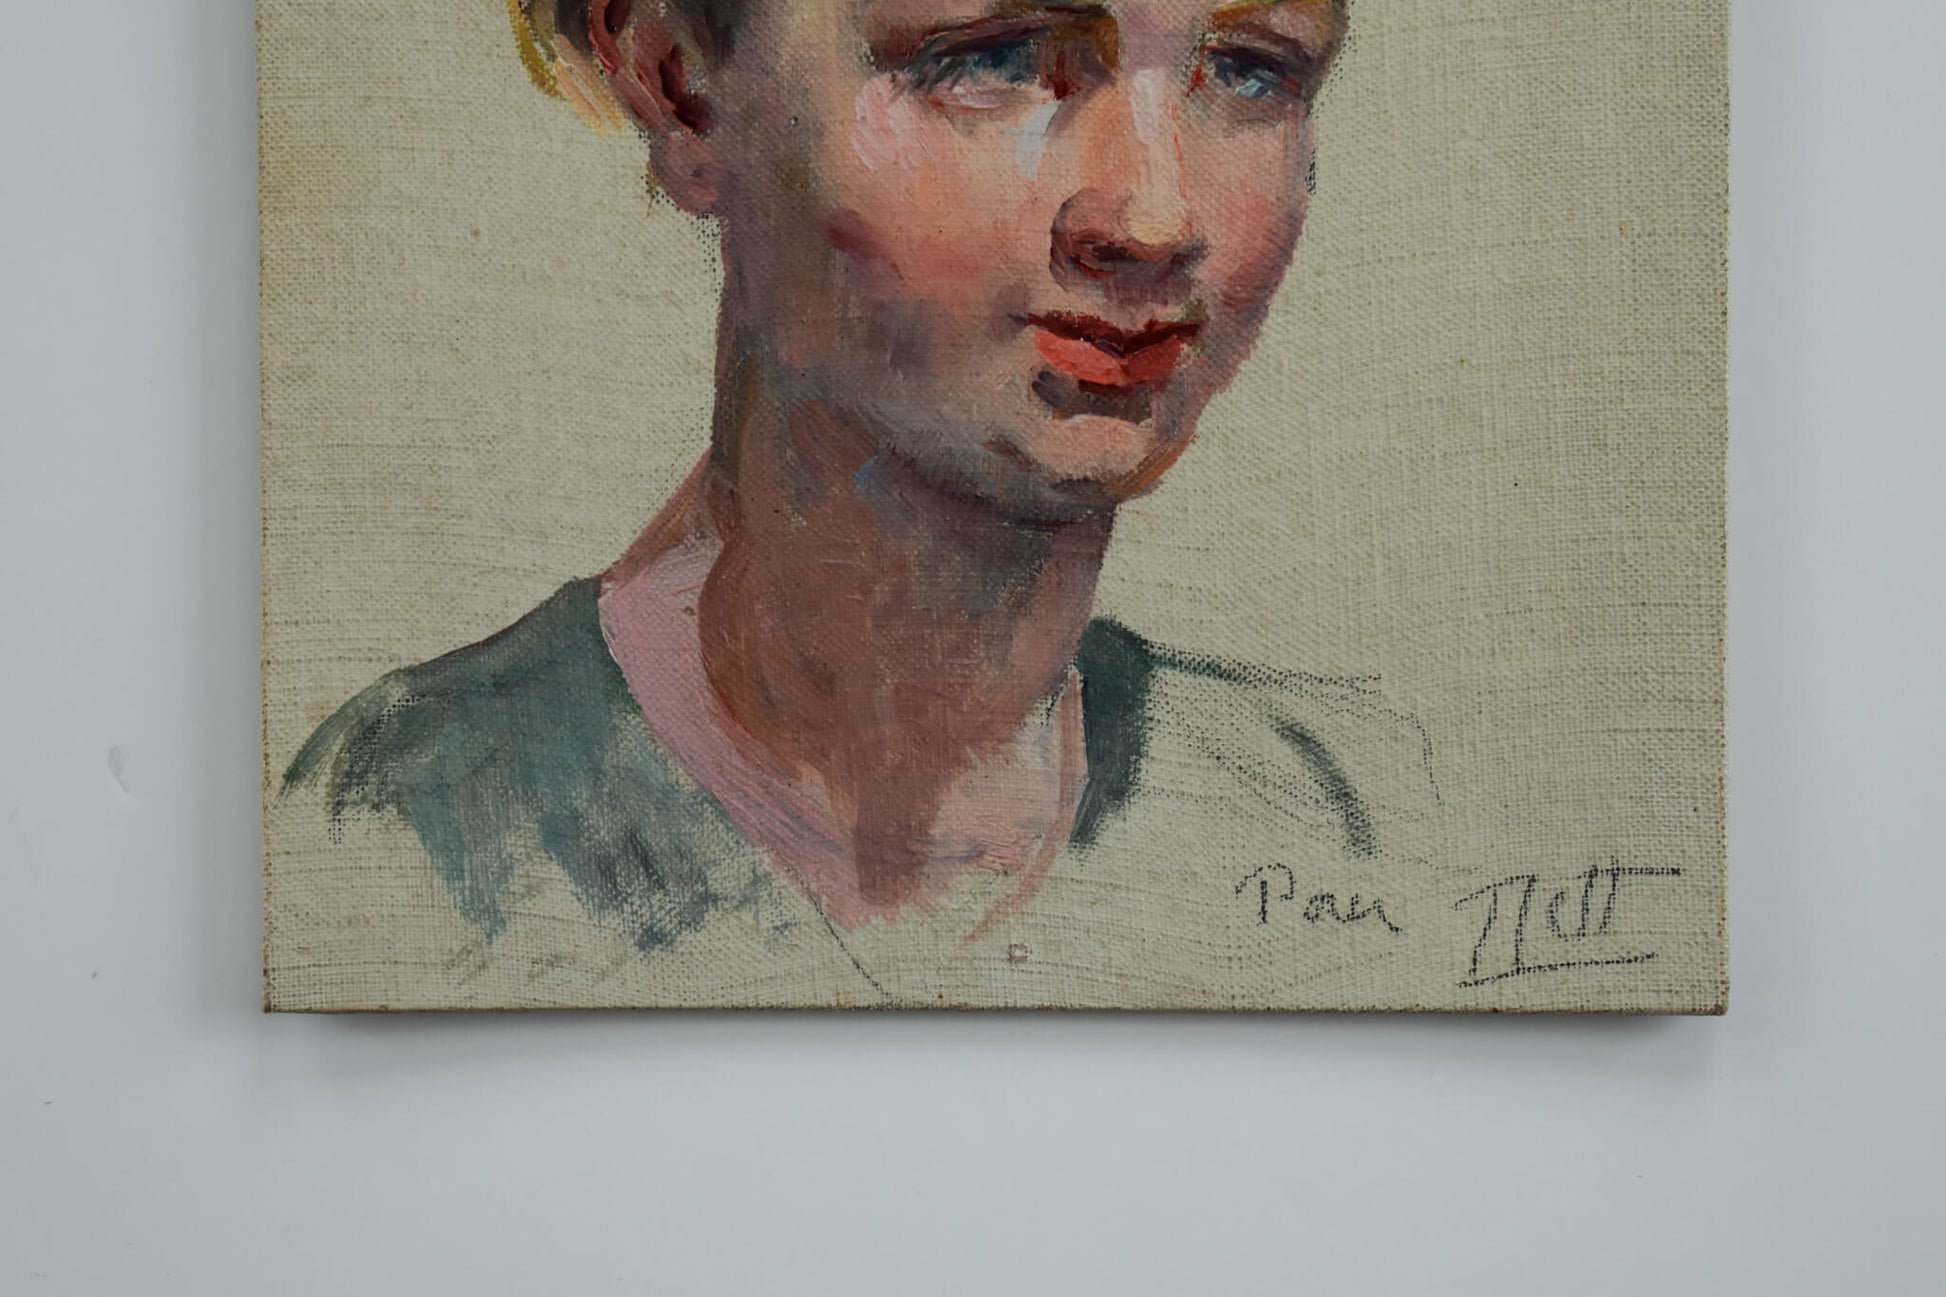 Vintage oil painting, portrait of a young woman with blue eyes circa 1940, by Odette Durand, for sale at Winckelmann Gallery